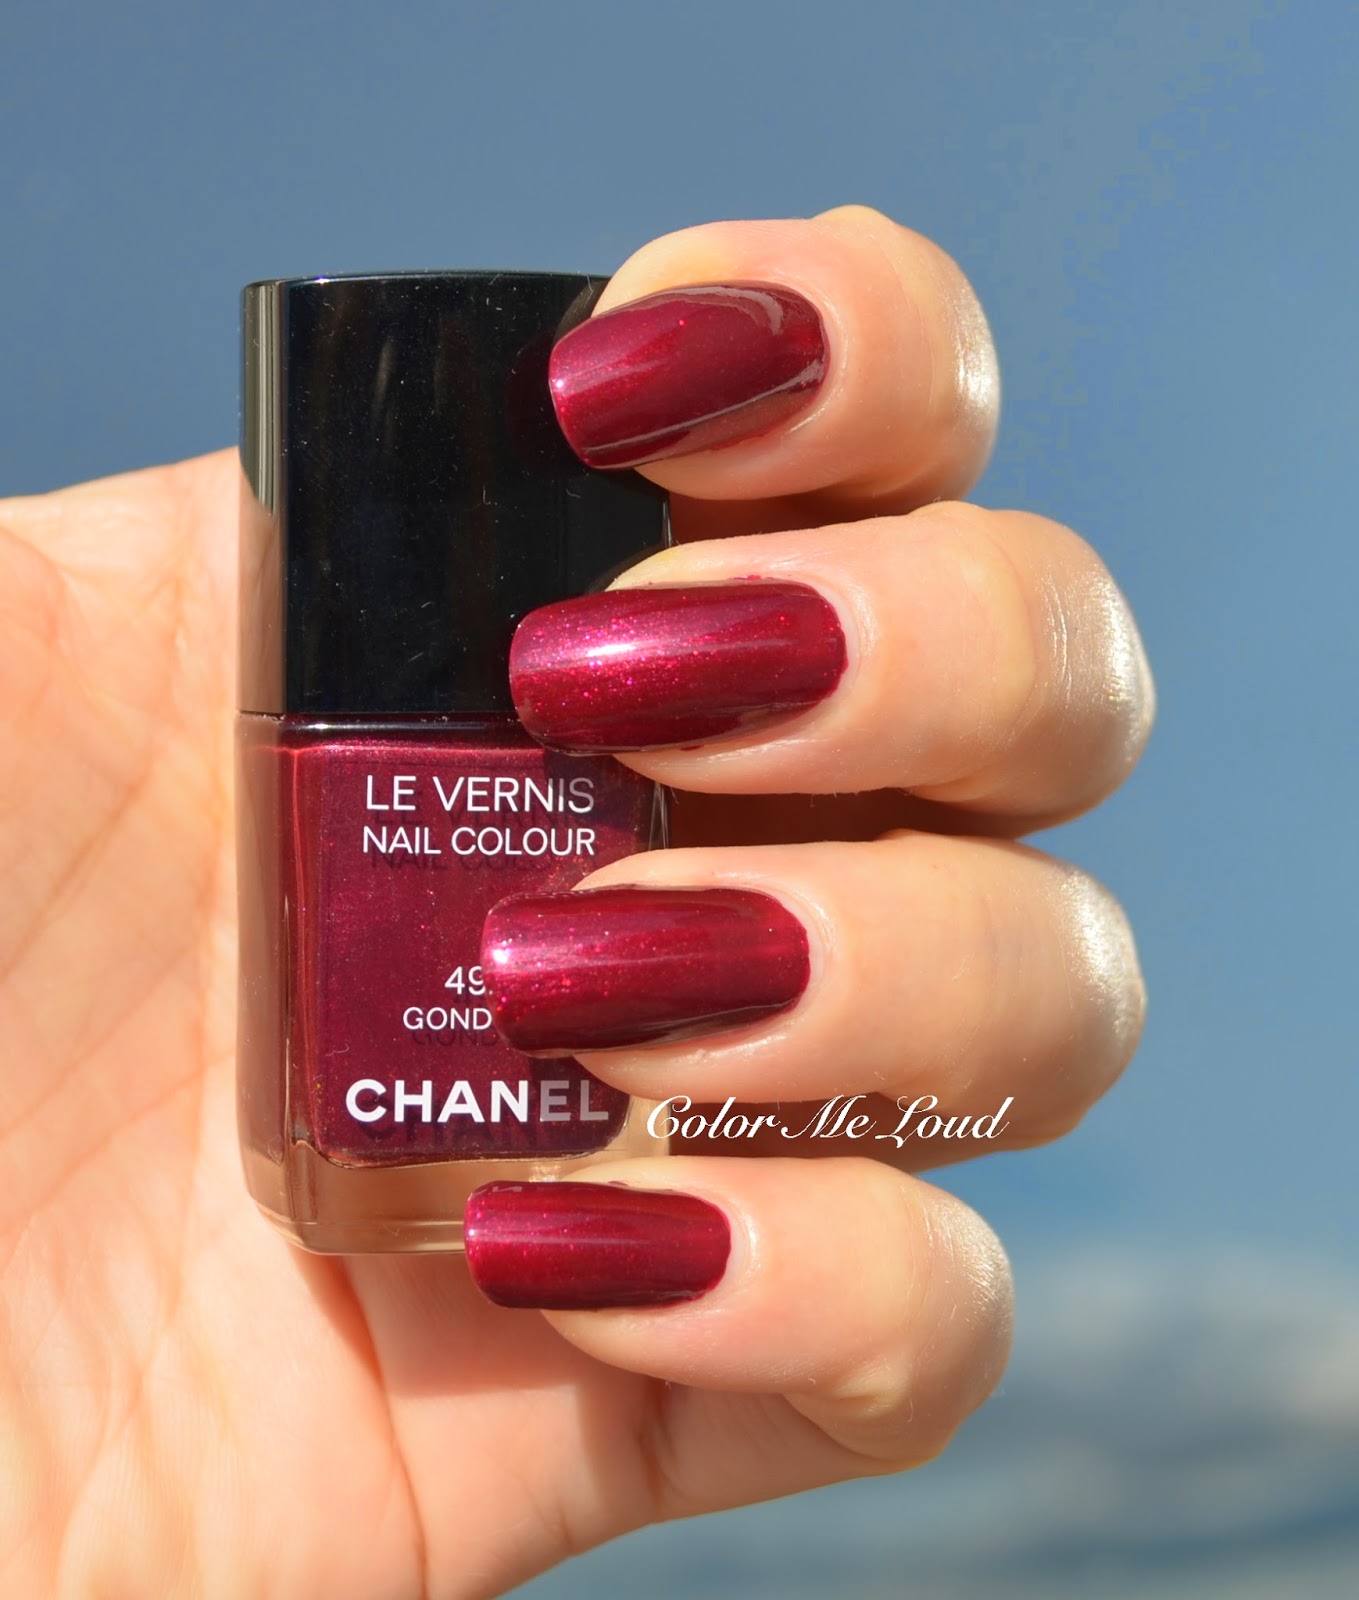 Be Right Back Post featuring Chanel Le Vernis #499 Gondola